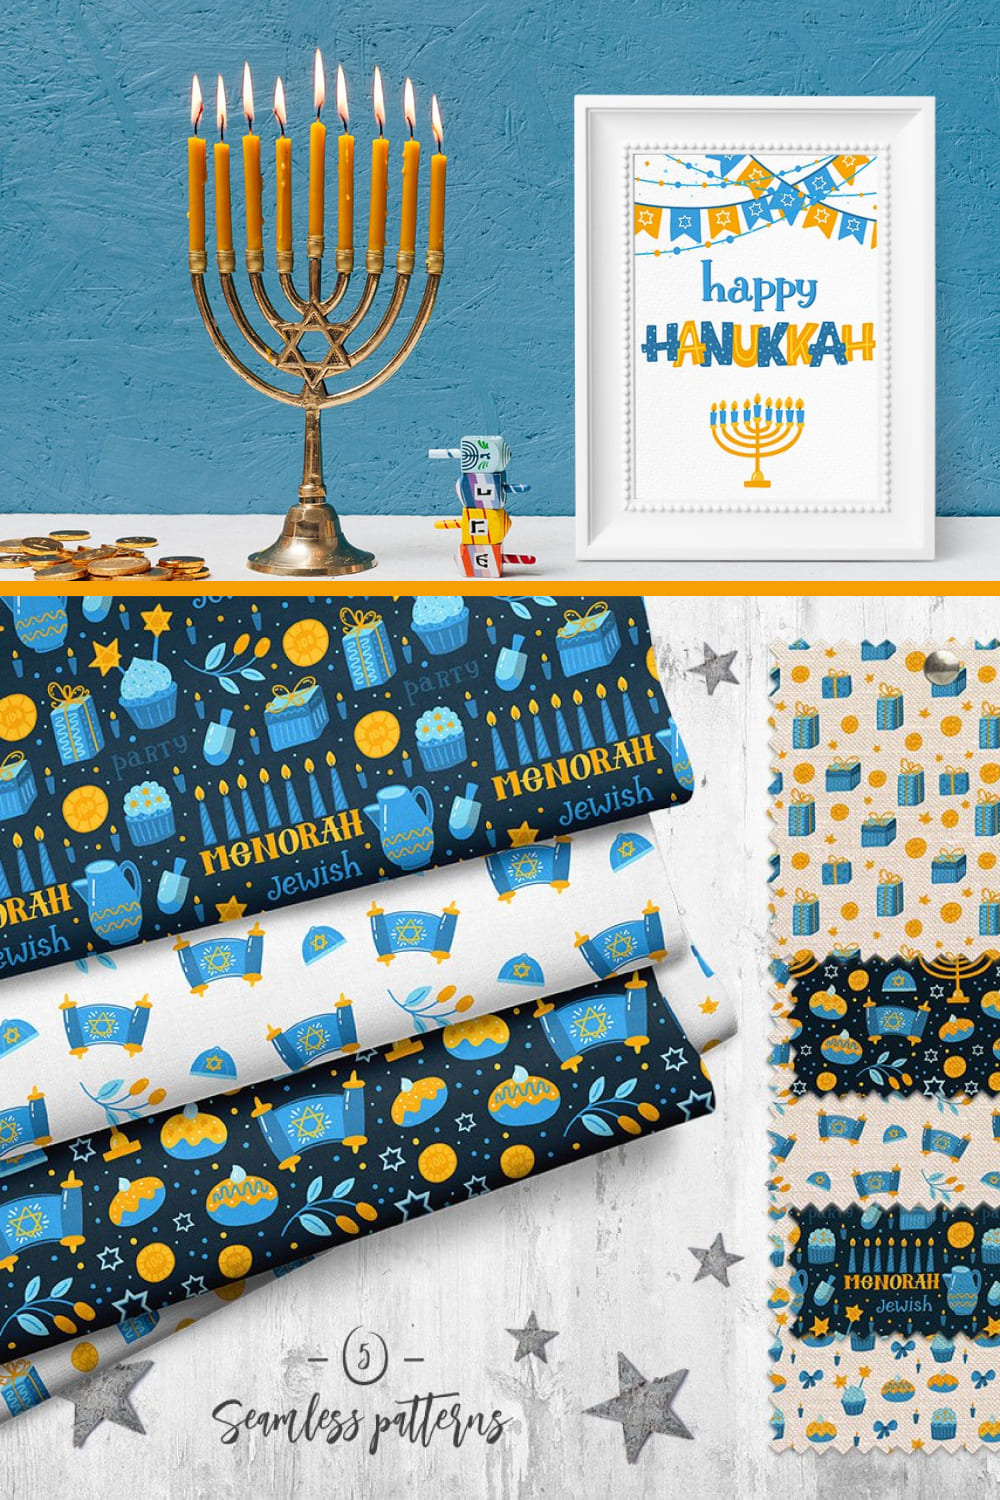 Late background designs for wrapping paper and more.